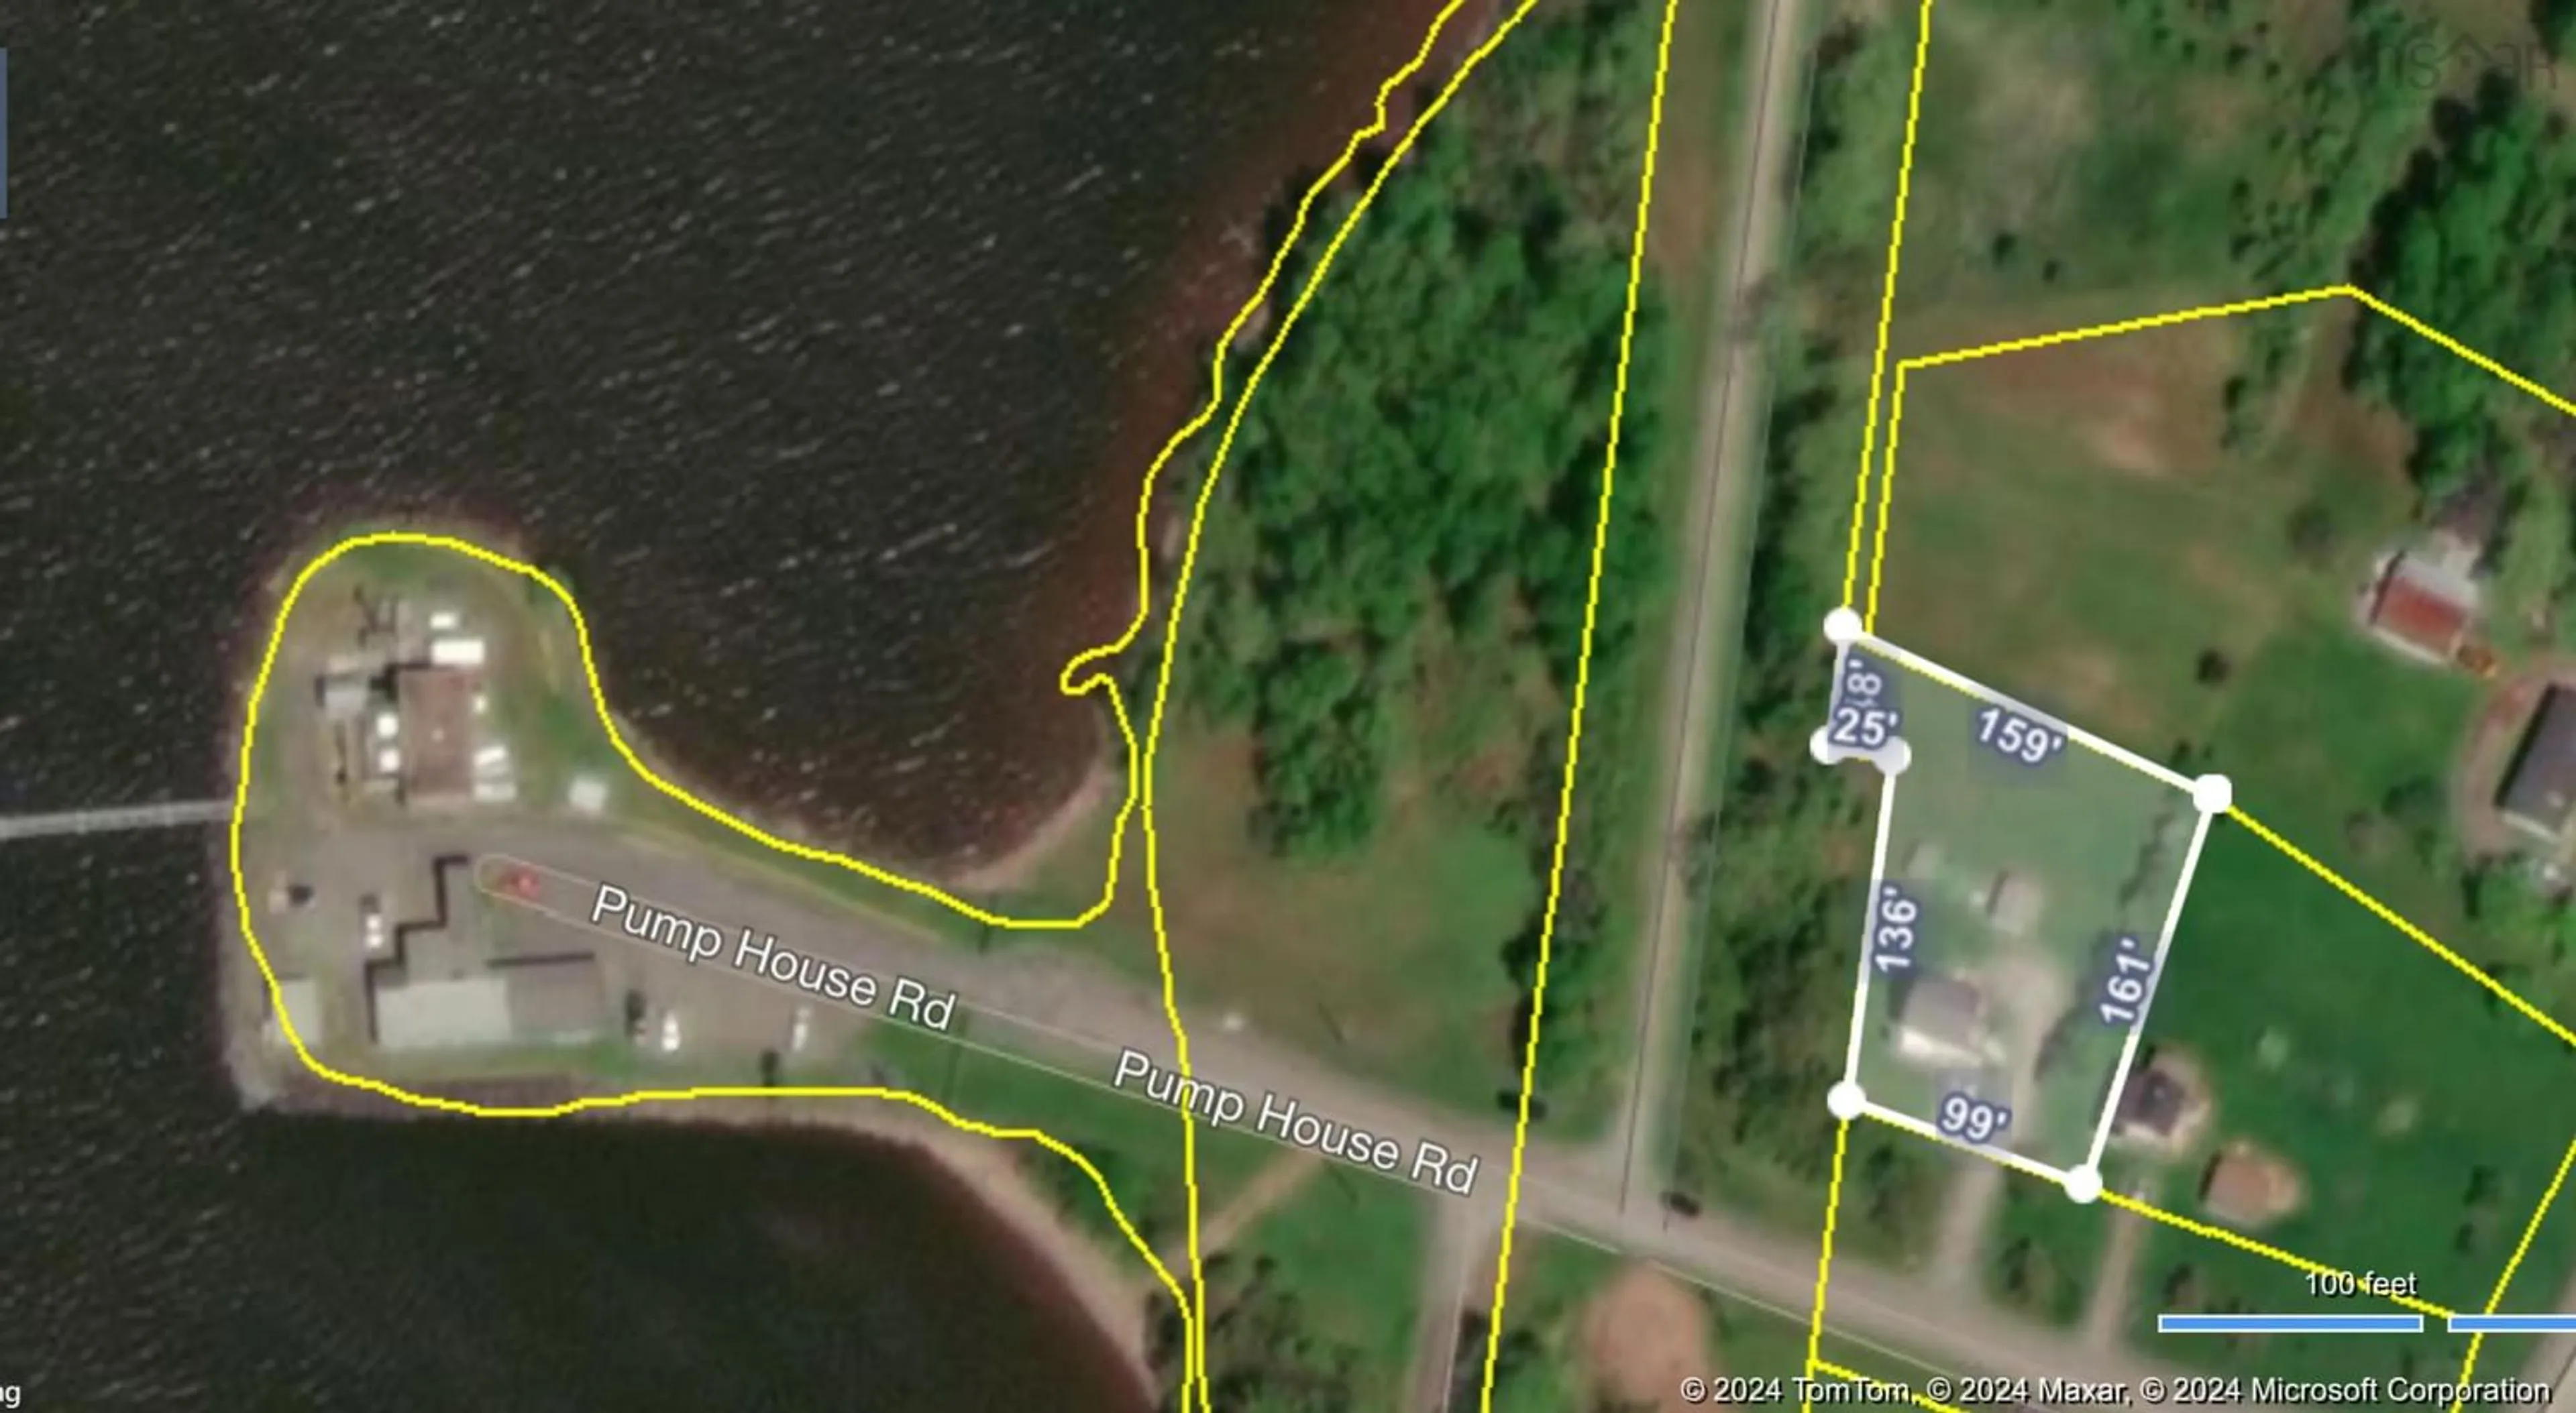 Picture of a map for 10 Pump House Rd, Granton Nova Scotia B2H 5C6